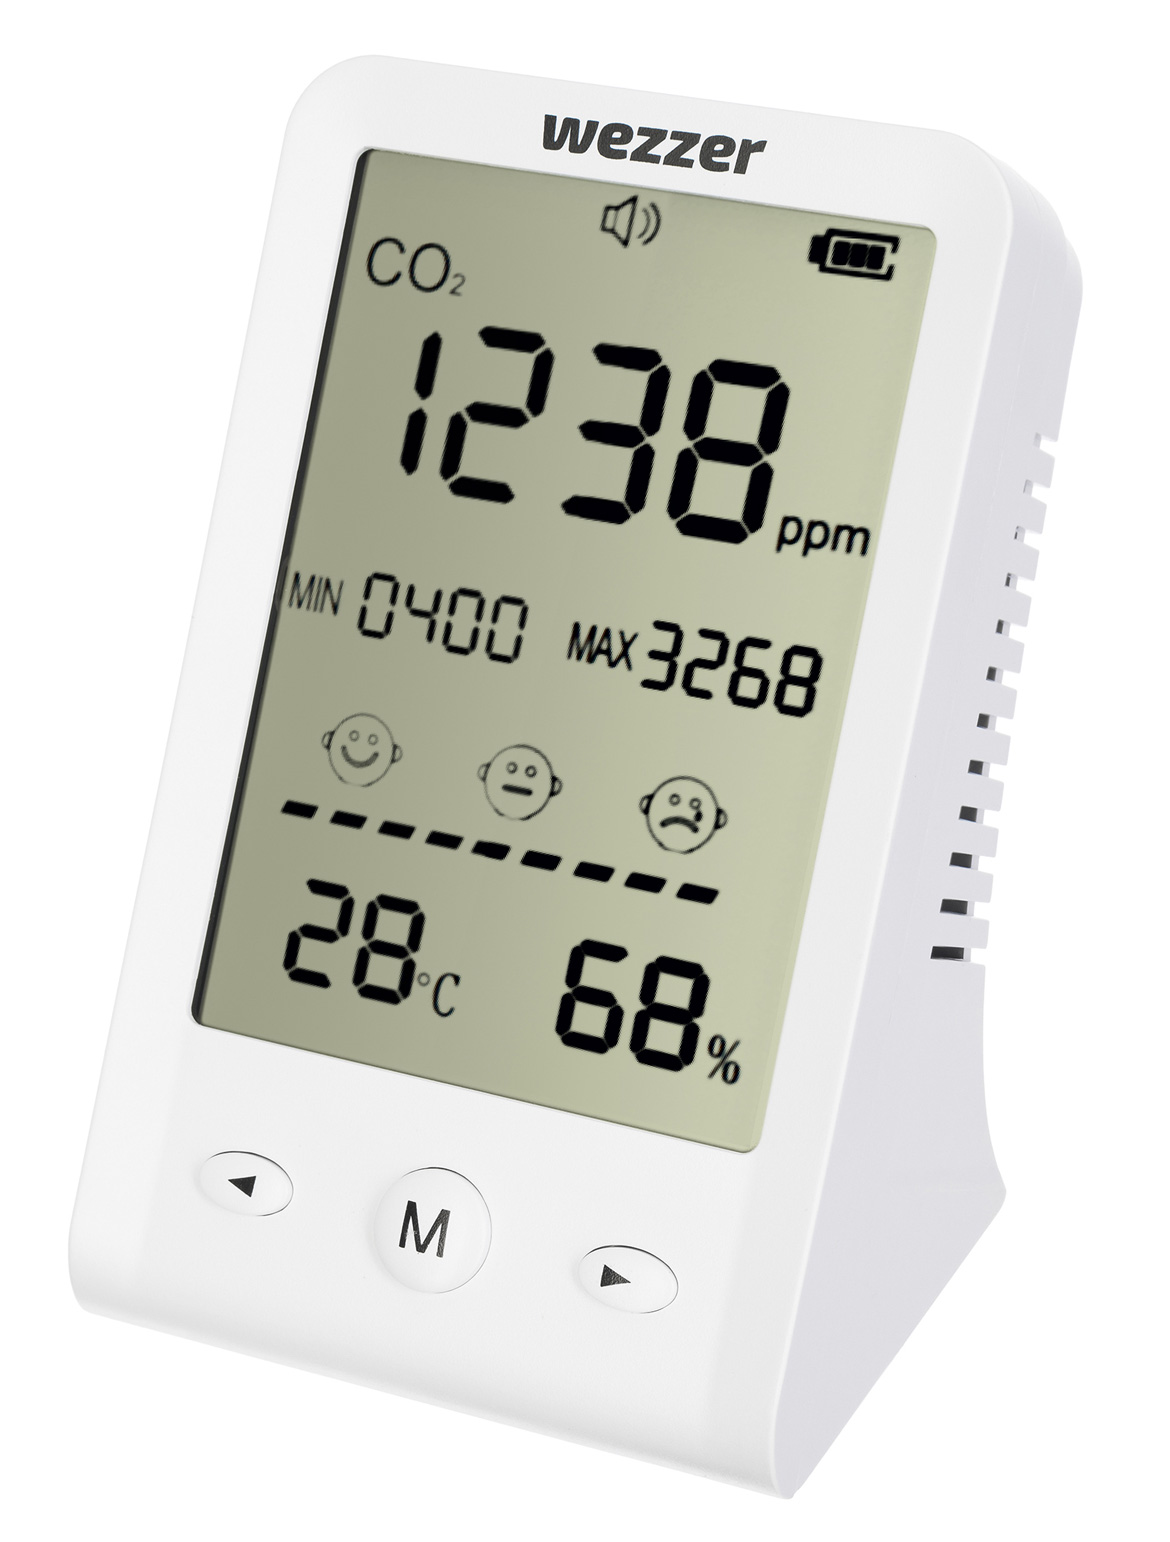 Elitech LT-2 Thermometer and Hygrometer Temperature and Humidity